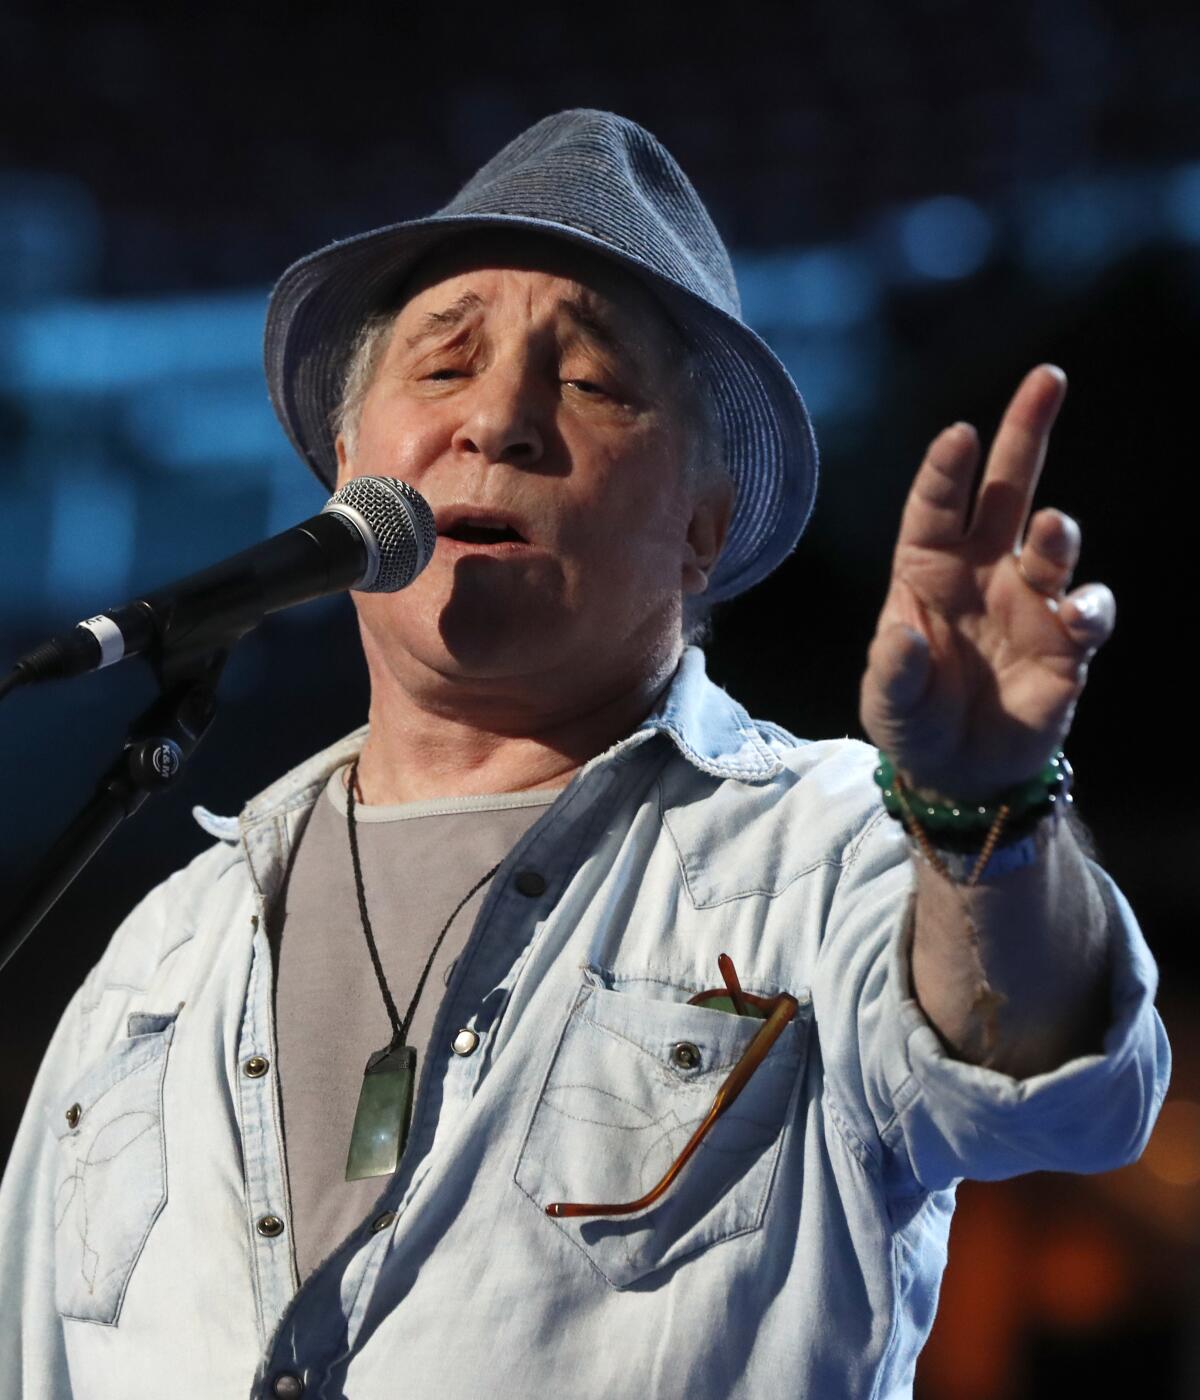 Paul Simon sings on stage with his left hand outstretched while wearing a gray fedora and casual shirt